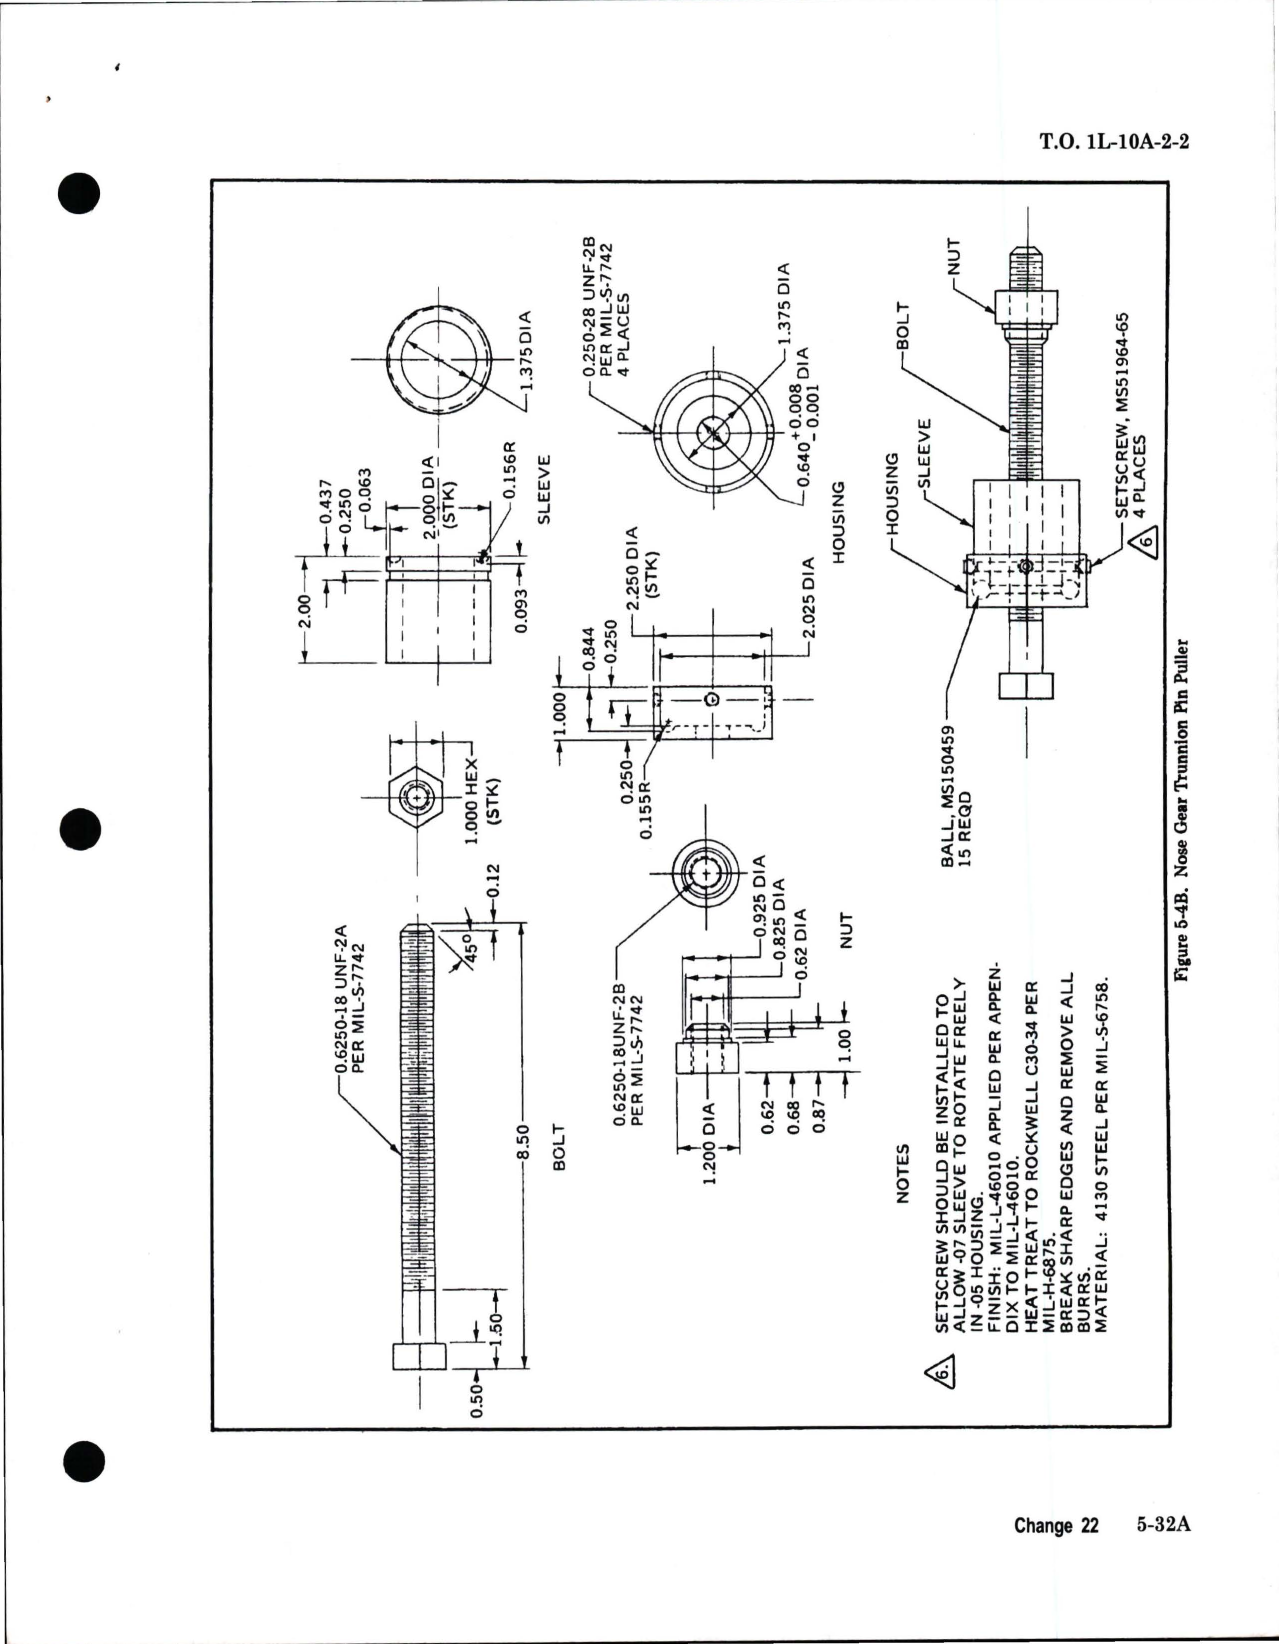 Sample page 5 from AirCorps Library document: Maintenance Instructions for Airframe Systems on OV-10A